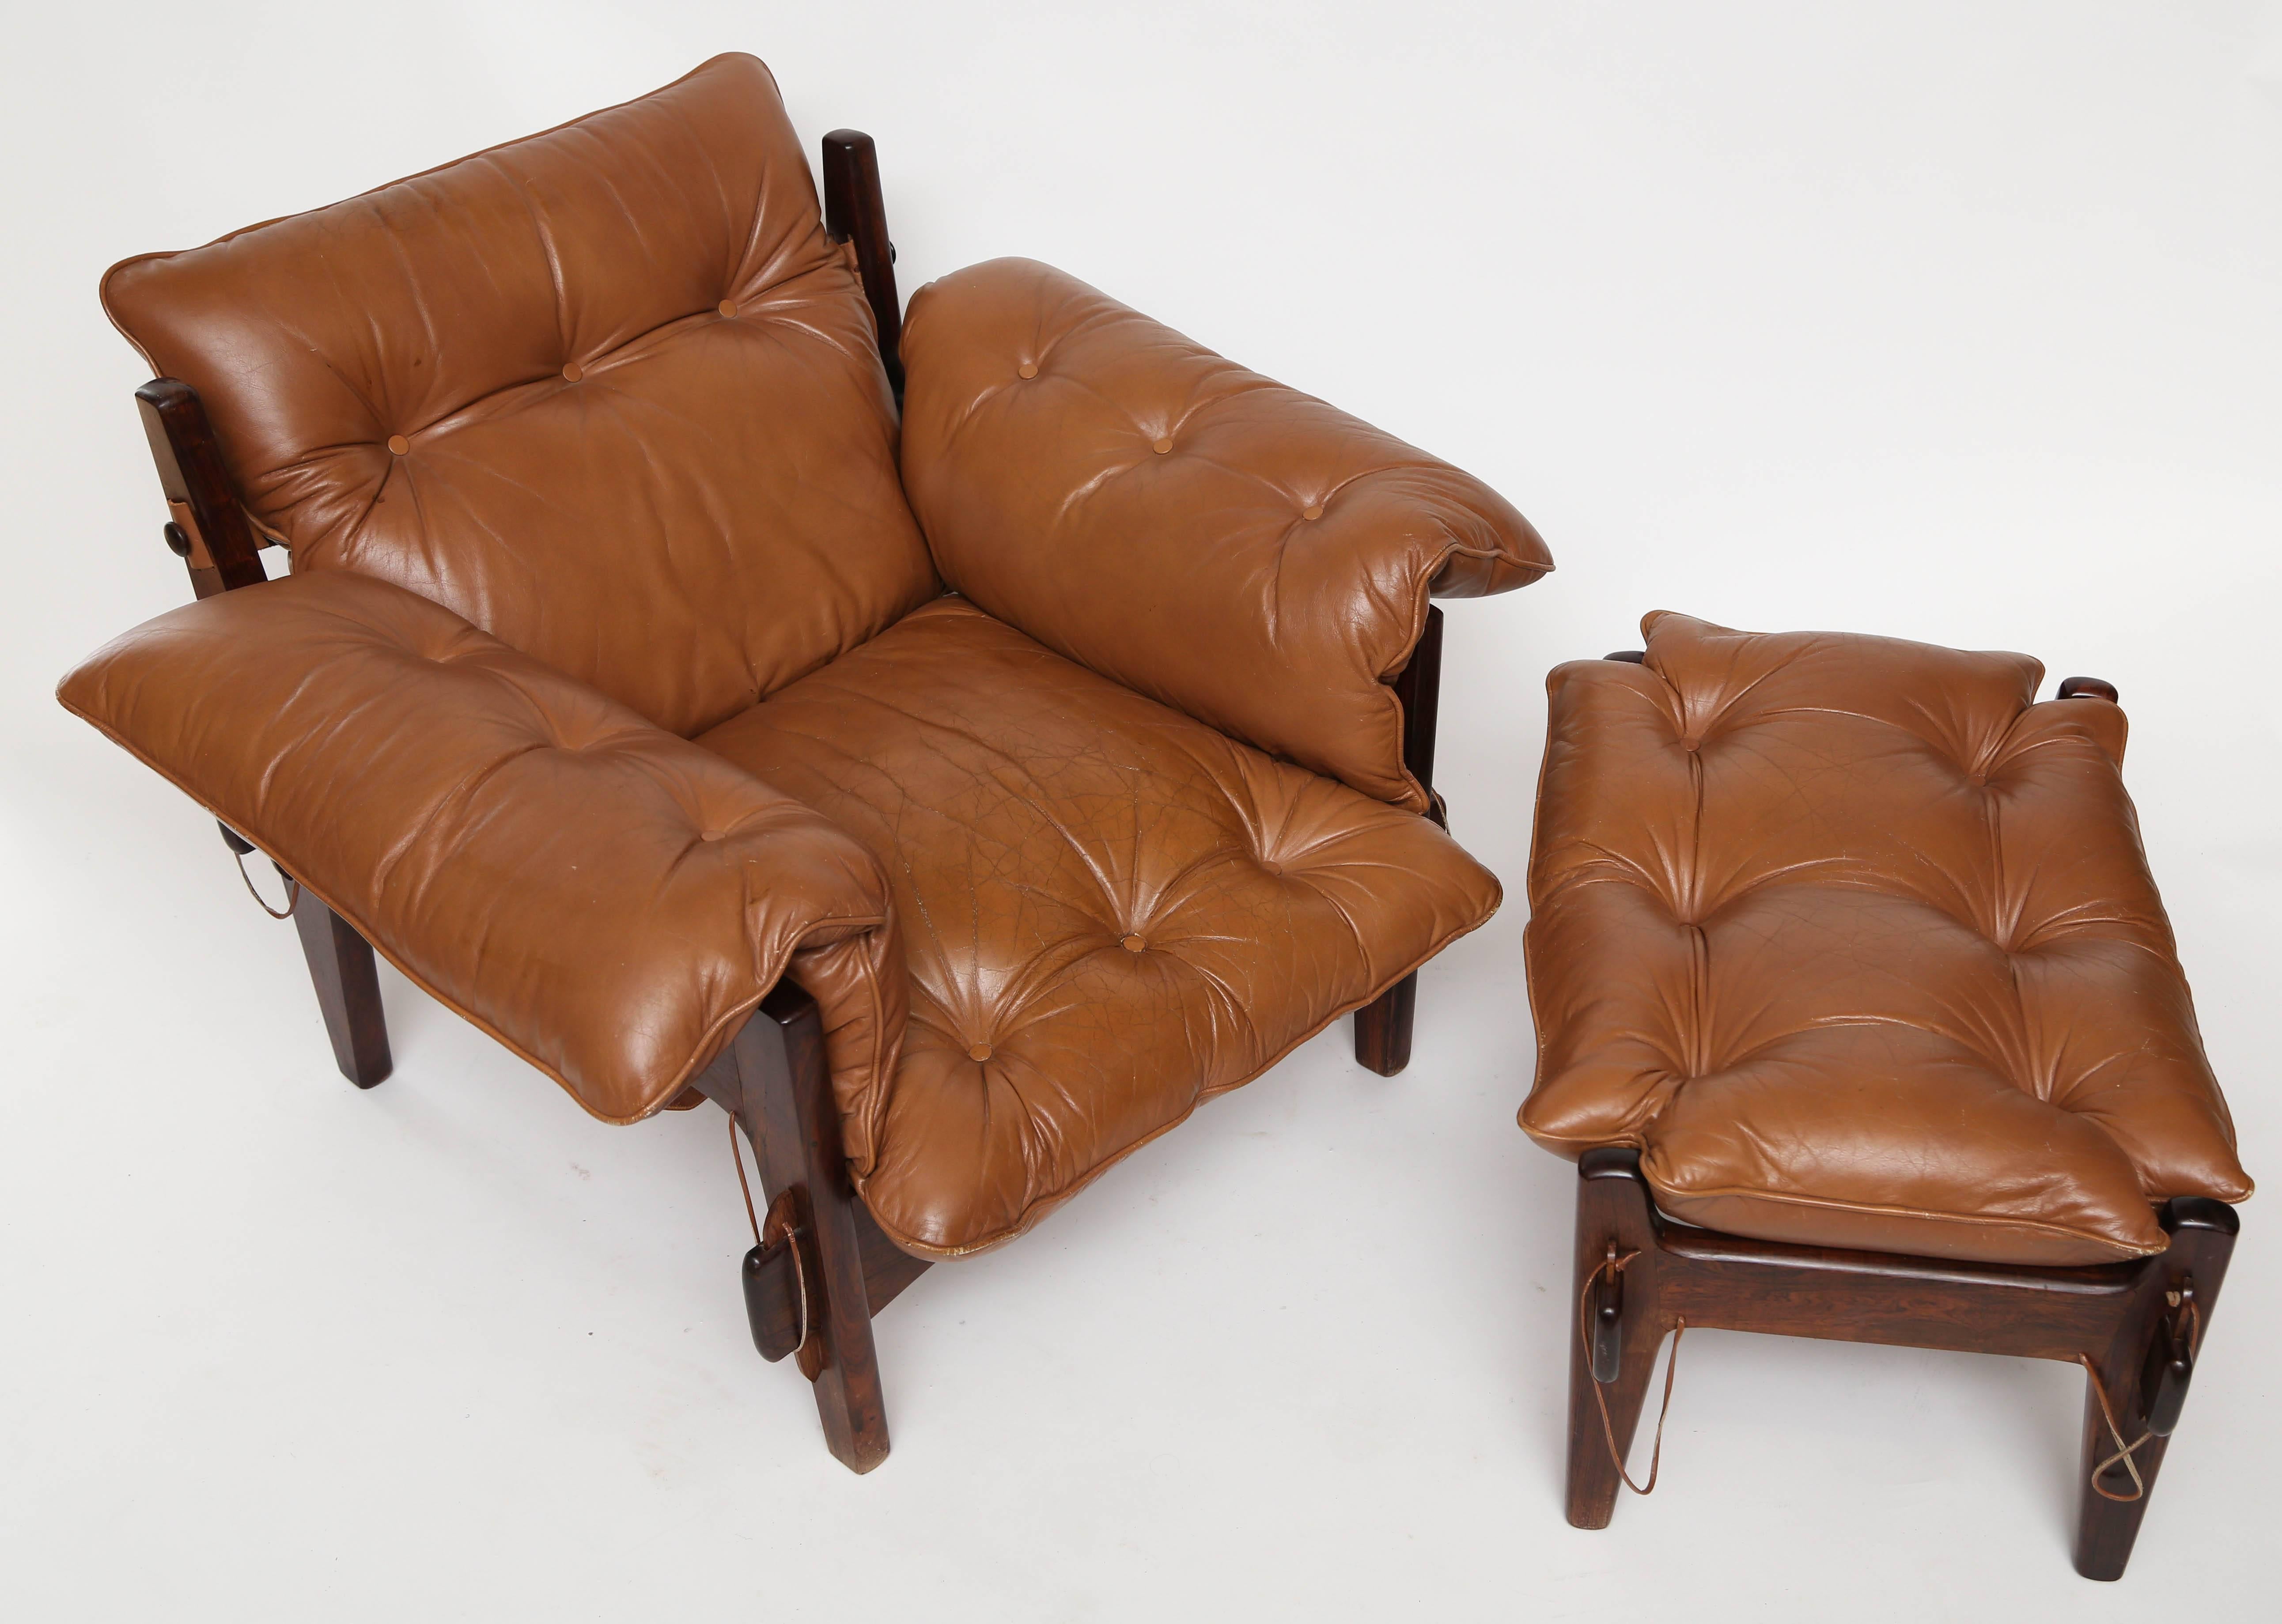 A demountable variation of the Iconic Sherif chairs.
This set is complete and original.
The series of furniture combined modern design, craft and the relaxed
attitude of the 1960s.
Rosewood and leather.